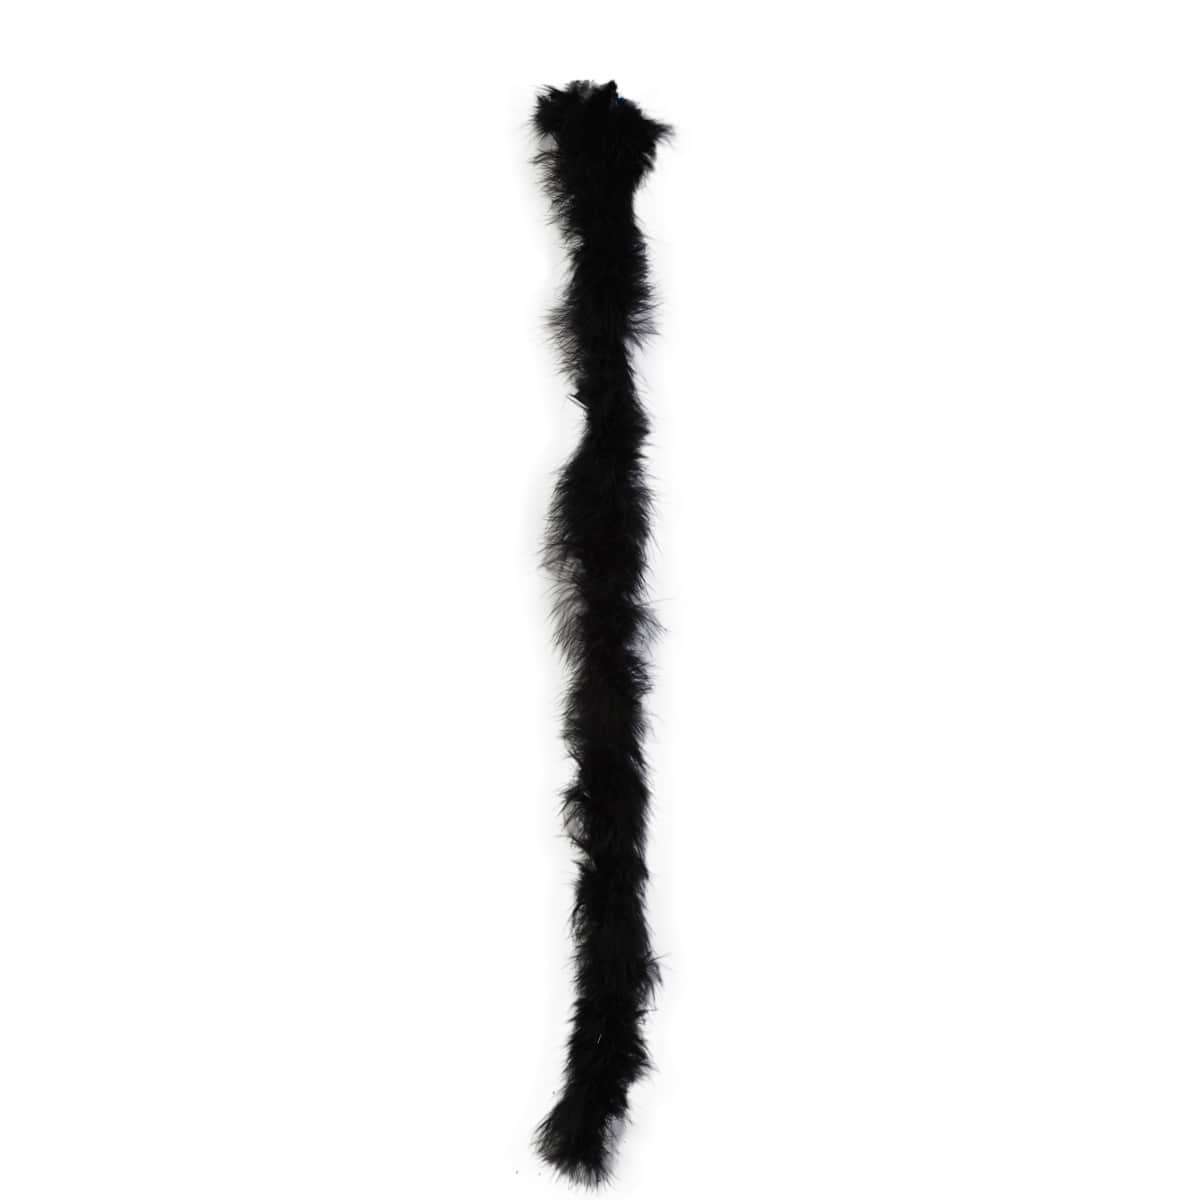 Find the Marabou Feather Boa at Michaels